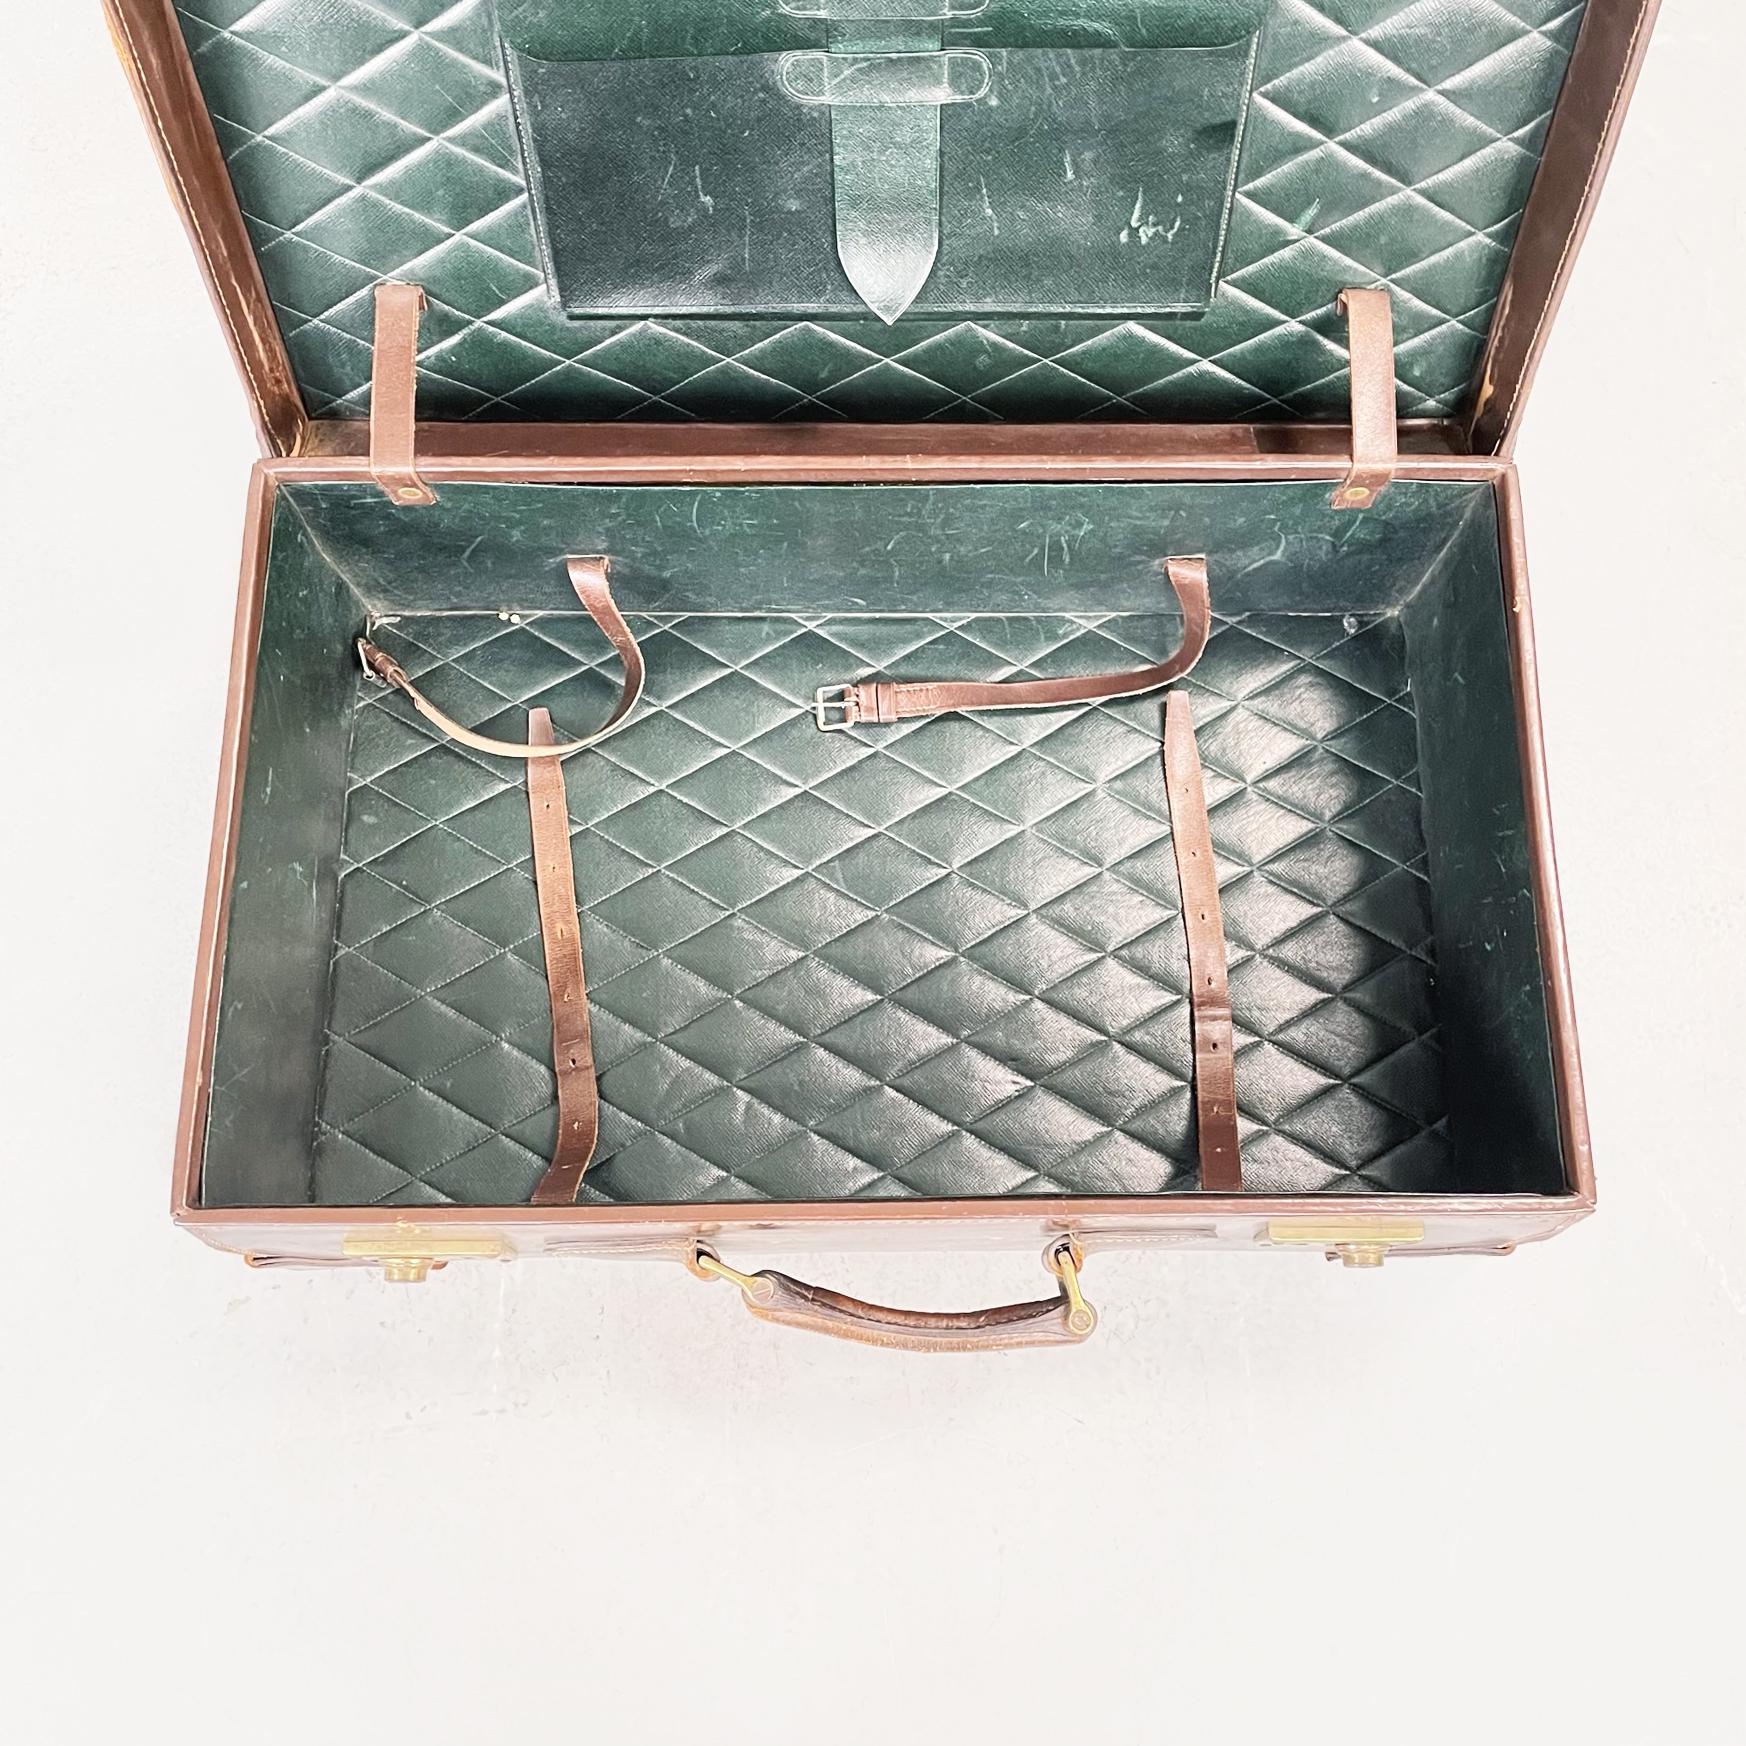 Italian Mid-Century Modern Luggage in Brown and Green Leather, 1970s For Sale 9